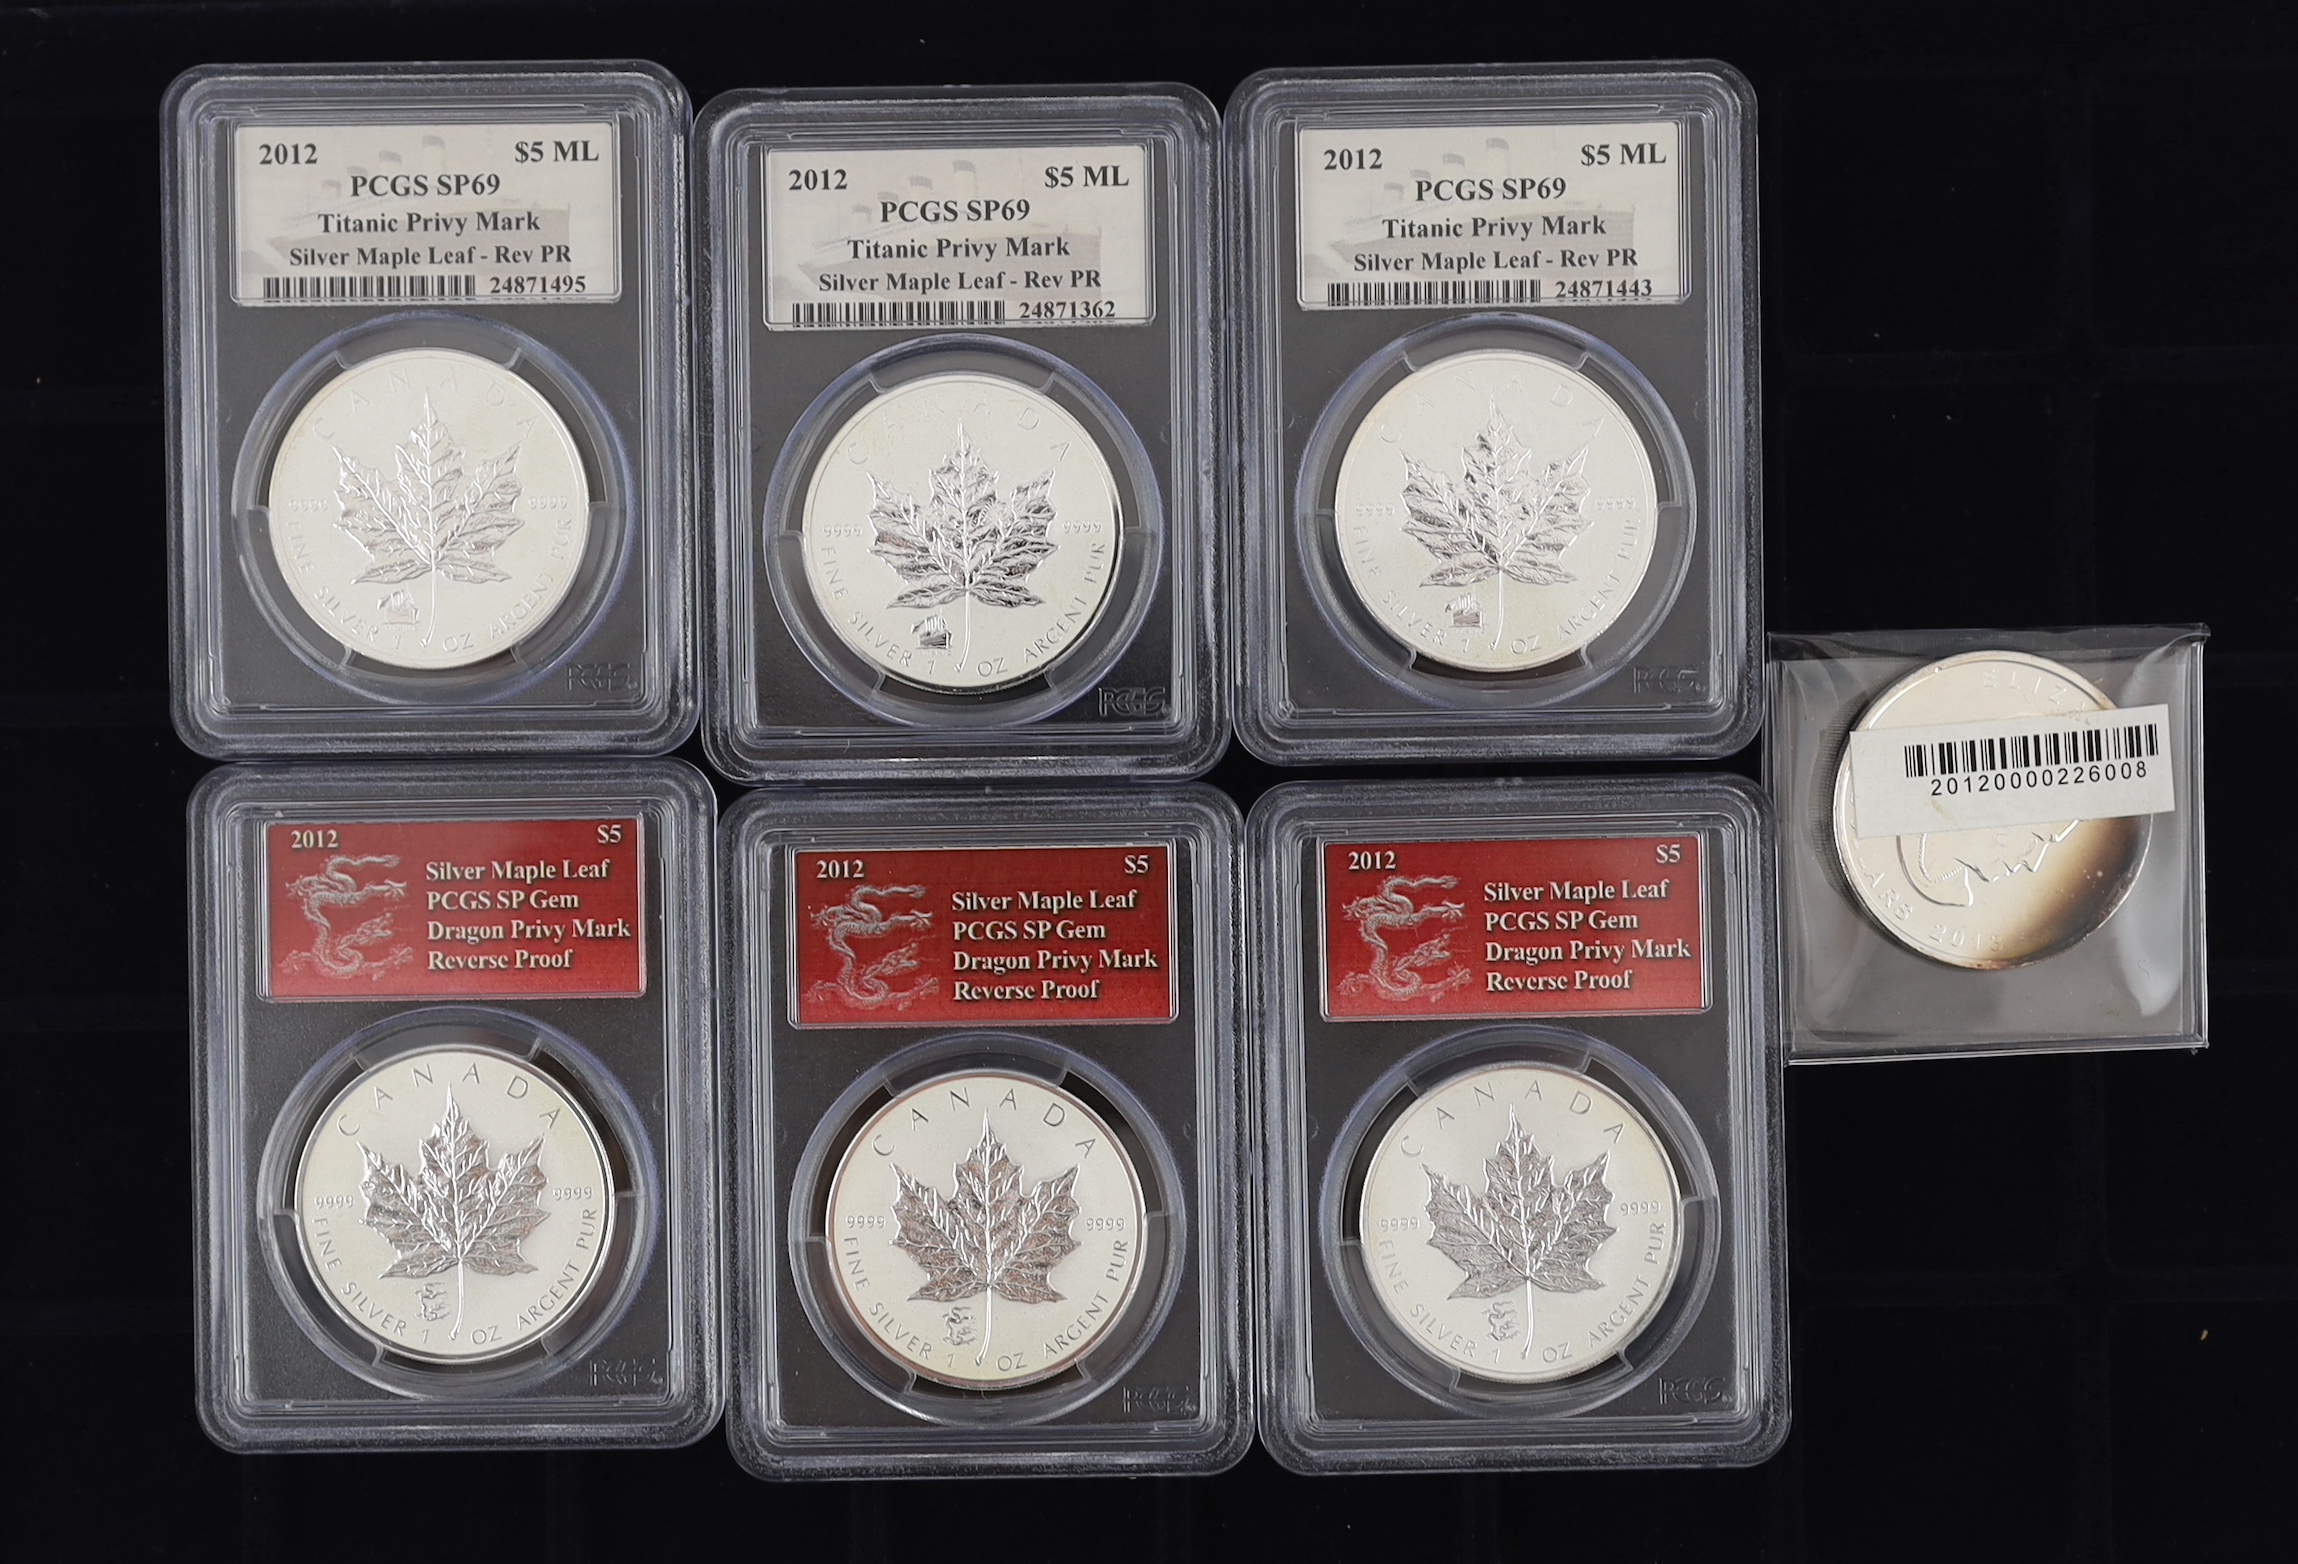 Canada QEII proof silver coins, three 2012 Maple Leaf $5, Titanic privy Mark, PCGS slabbed and graded SP69 and three 2012 Maple Leaf $5, Dragon privy Mark, PCGS graded and slabbed SP gem together with a 2013 $5 1 ounce f